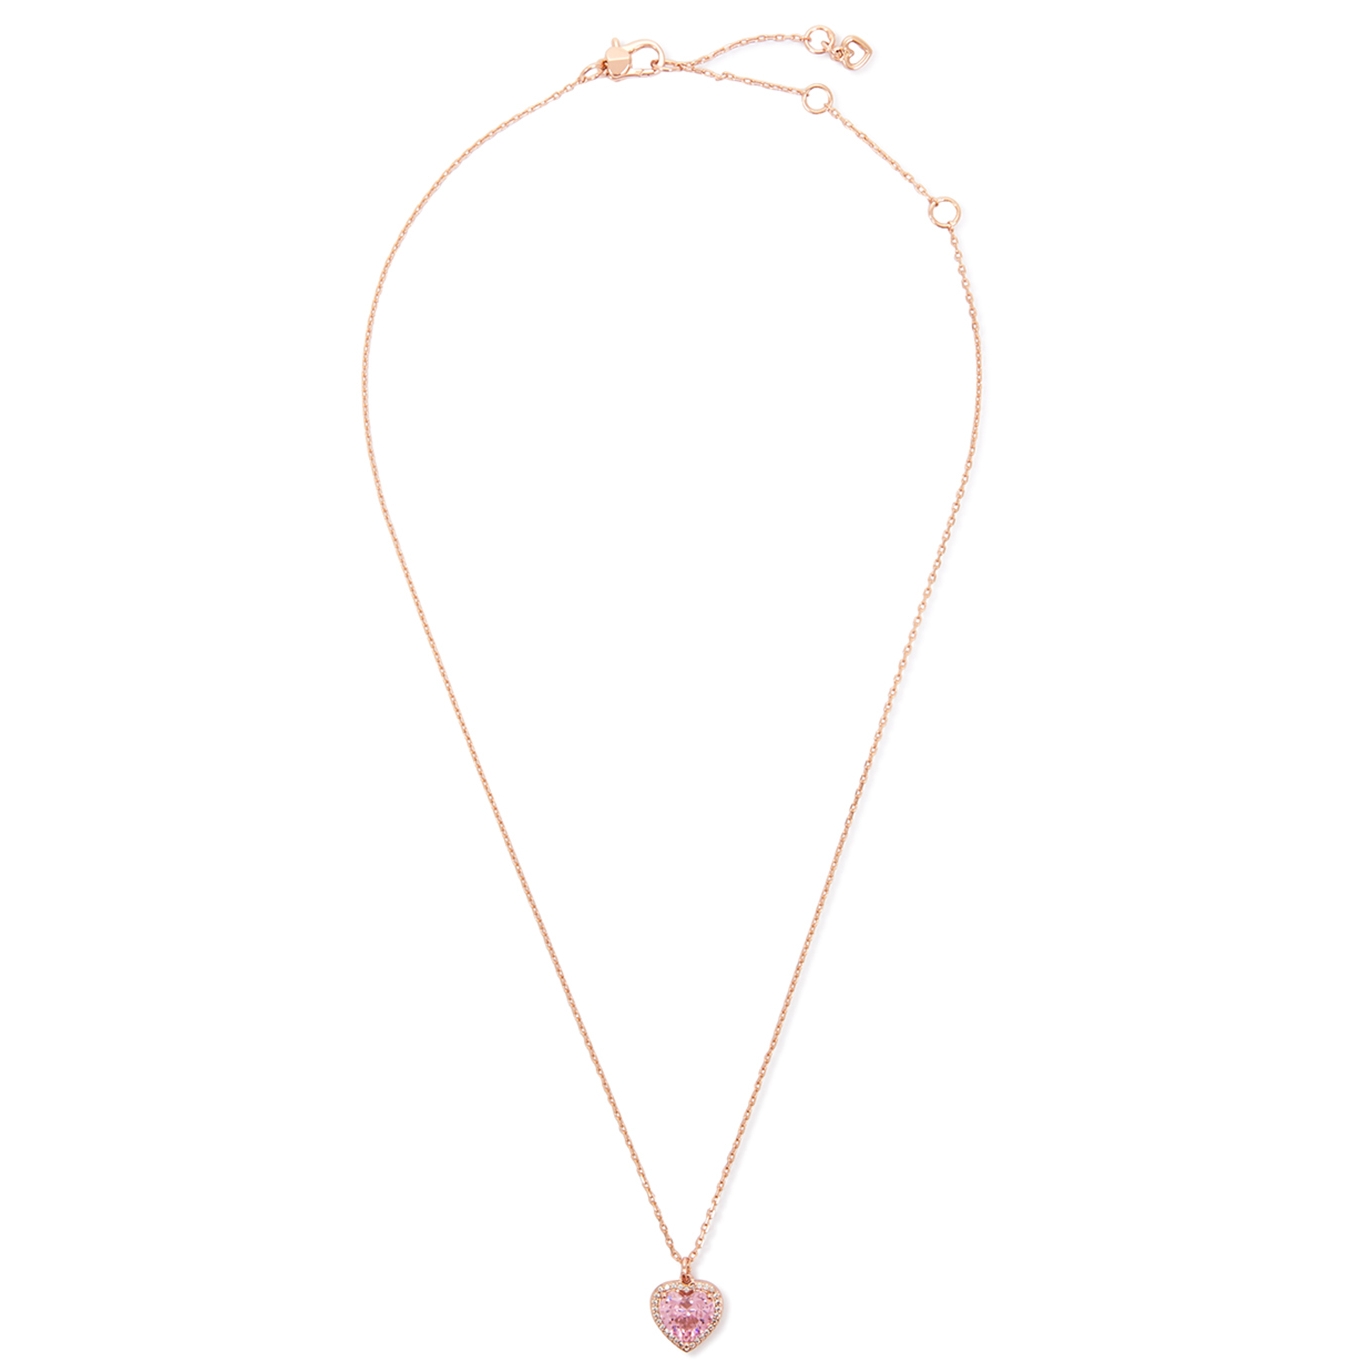 Kate Spade New York Heart Crystal-embellished Necklace - Pink - One Size